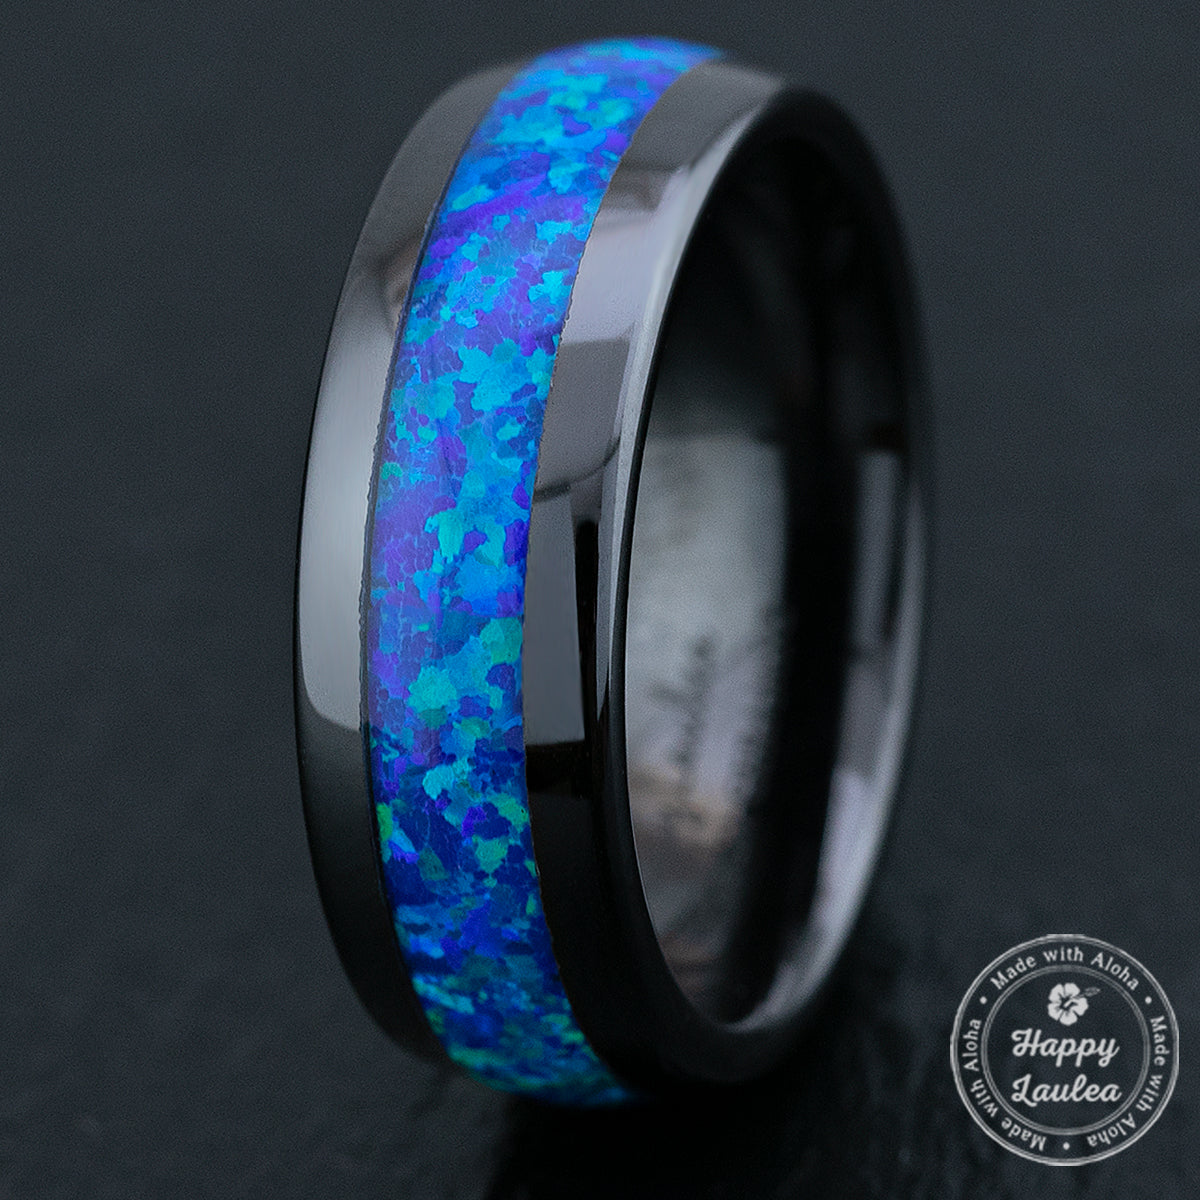 Black Hi-Tech Ceramic Ring with Blue Opal Inlay - 8mm, Dome Shape, Comfort Fitment